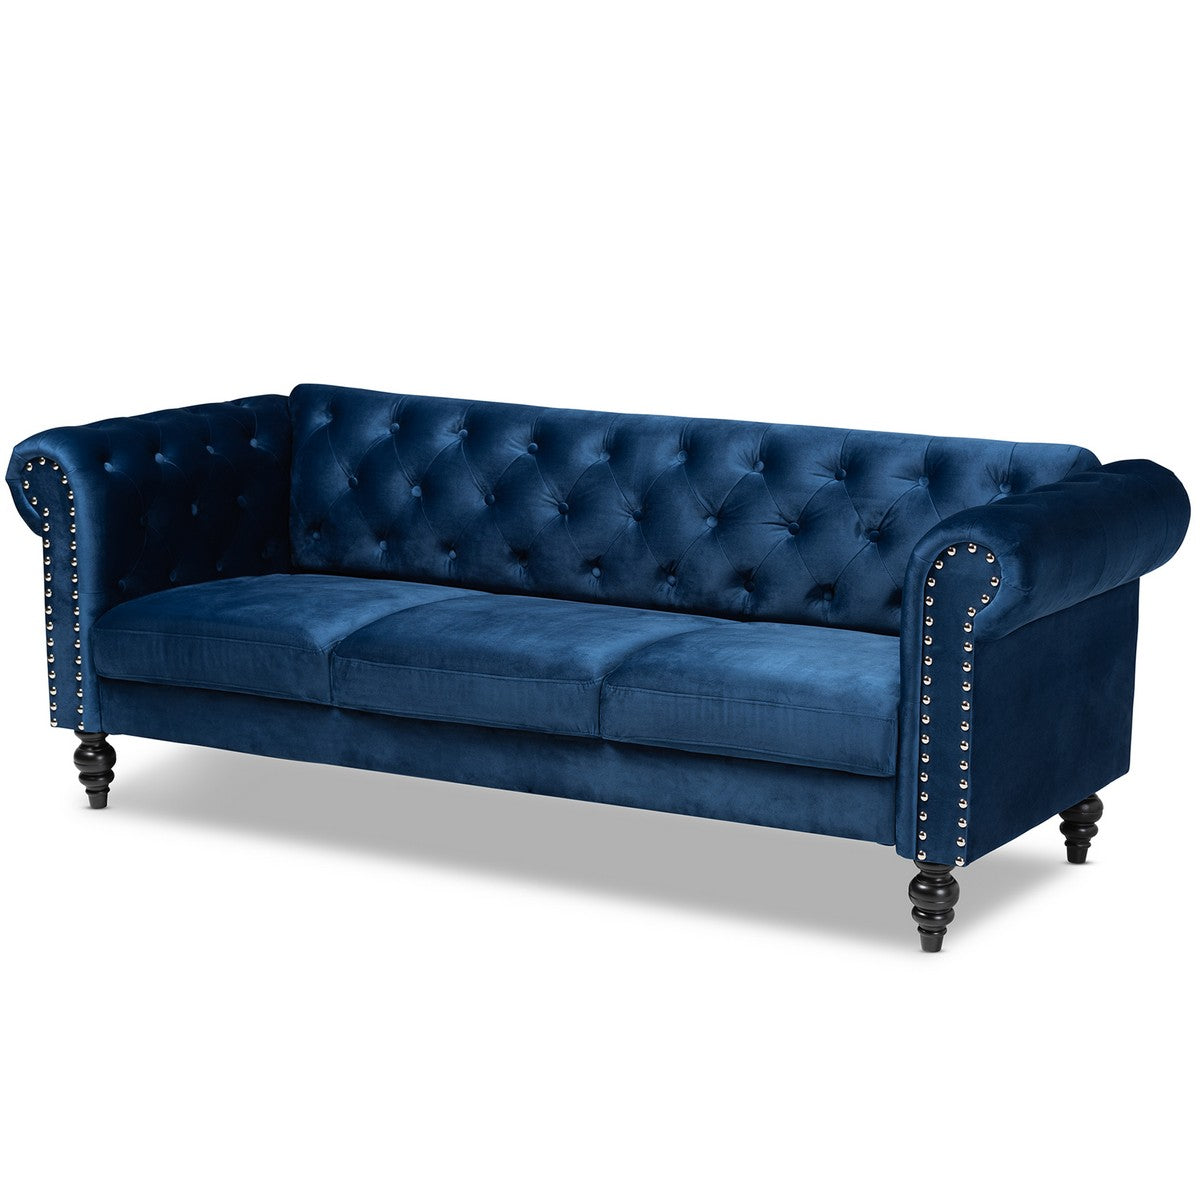 Baxton Studio Emma Traditional and Transitional Navy Blue Velvet Fabric Upholstered and Button Tufted Chesterfield Sofa Baxton Studio-sofas-Minimal And Modern - 1